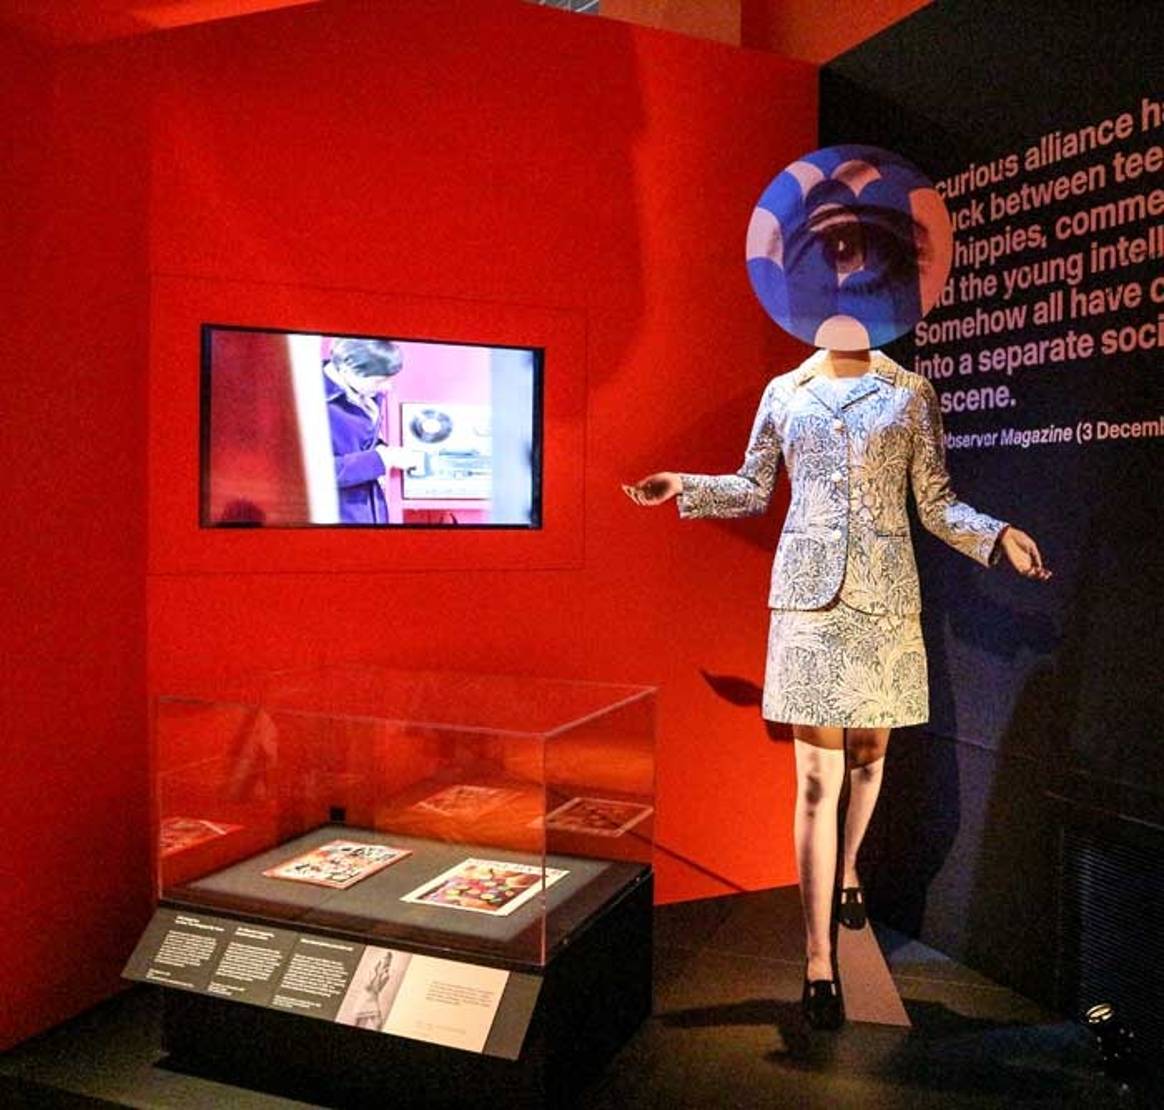 'You Say You Want a Revolution?' 1960s exhibition opens in London